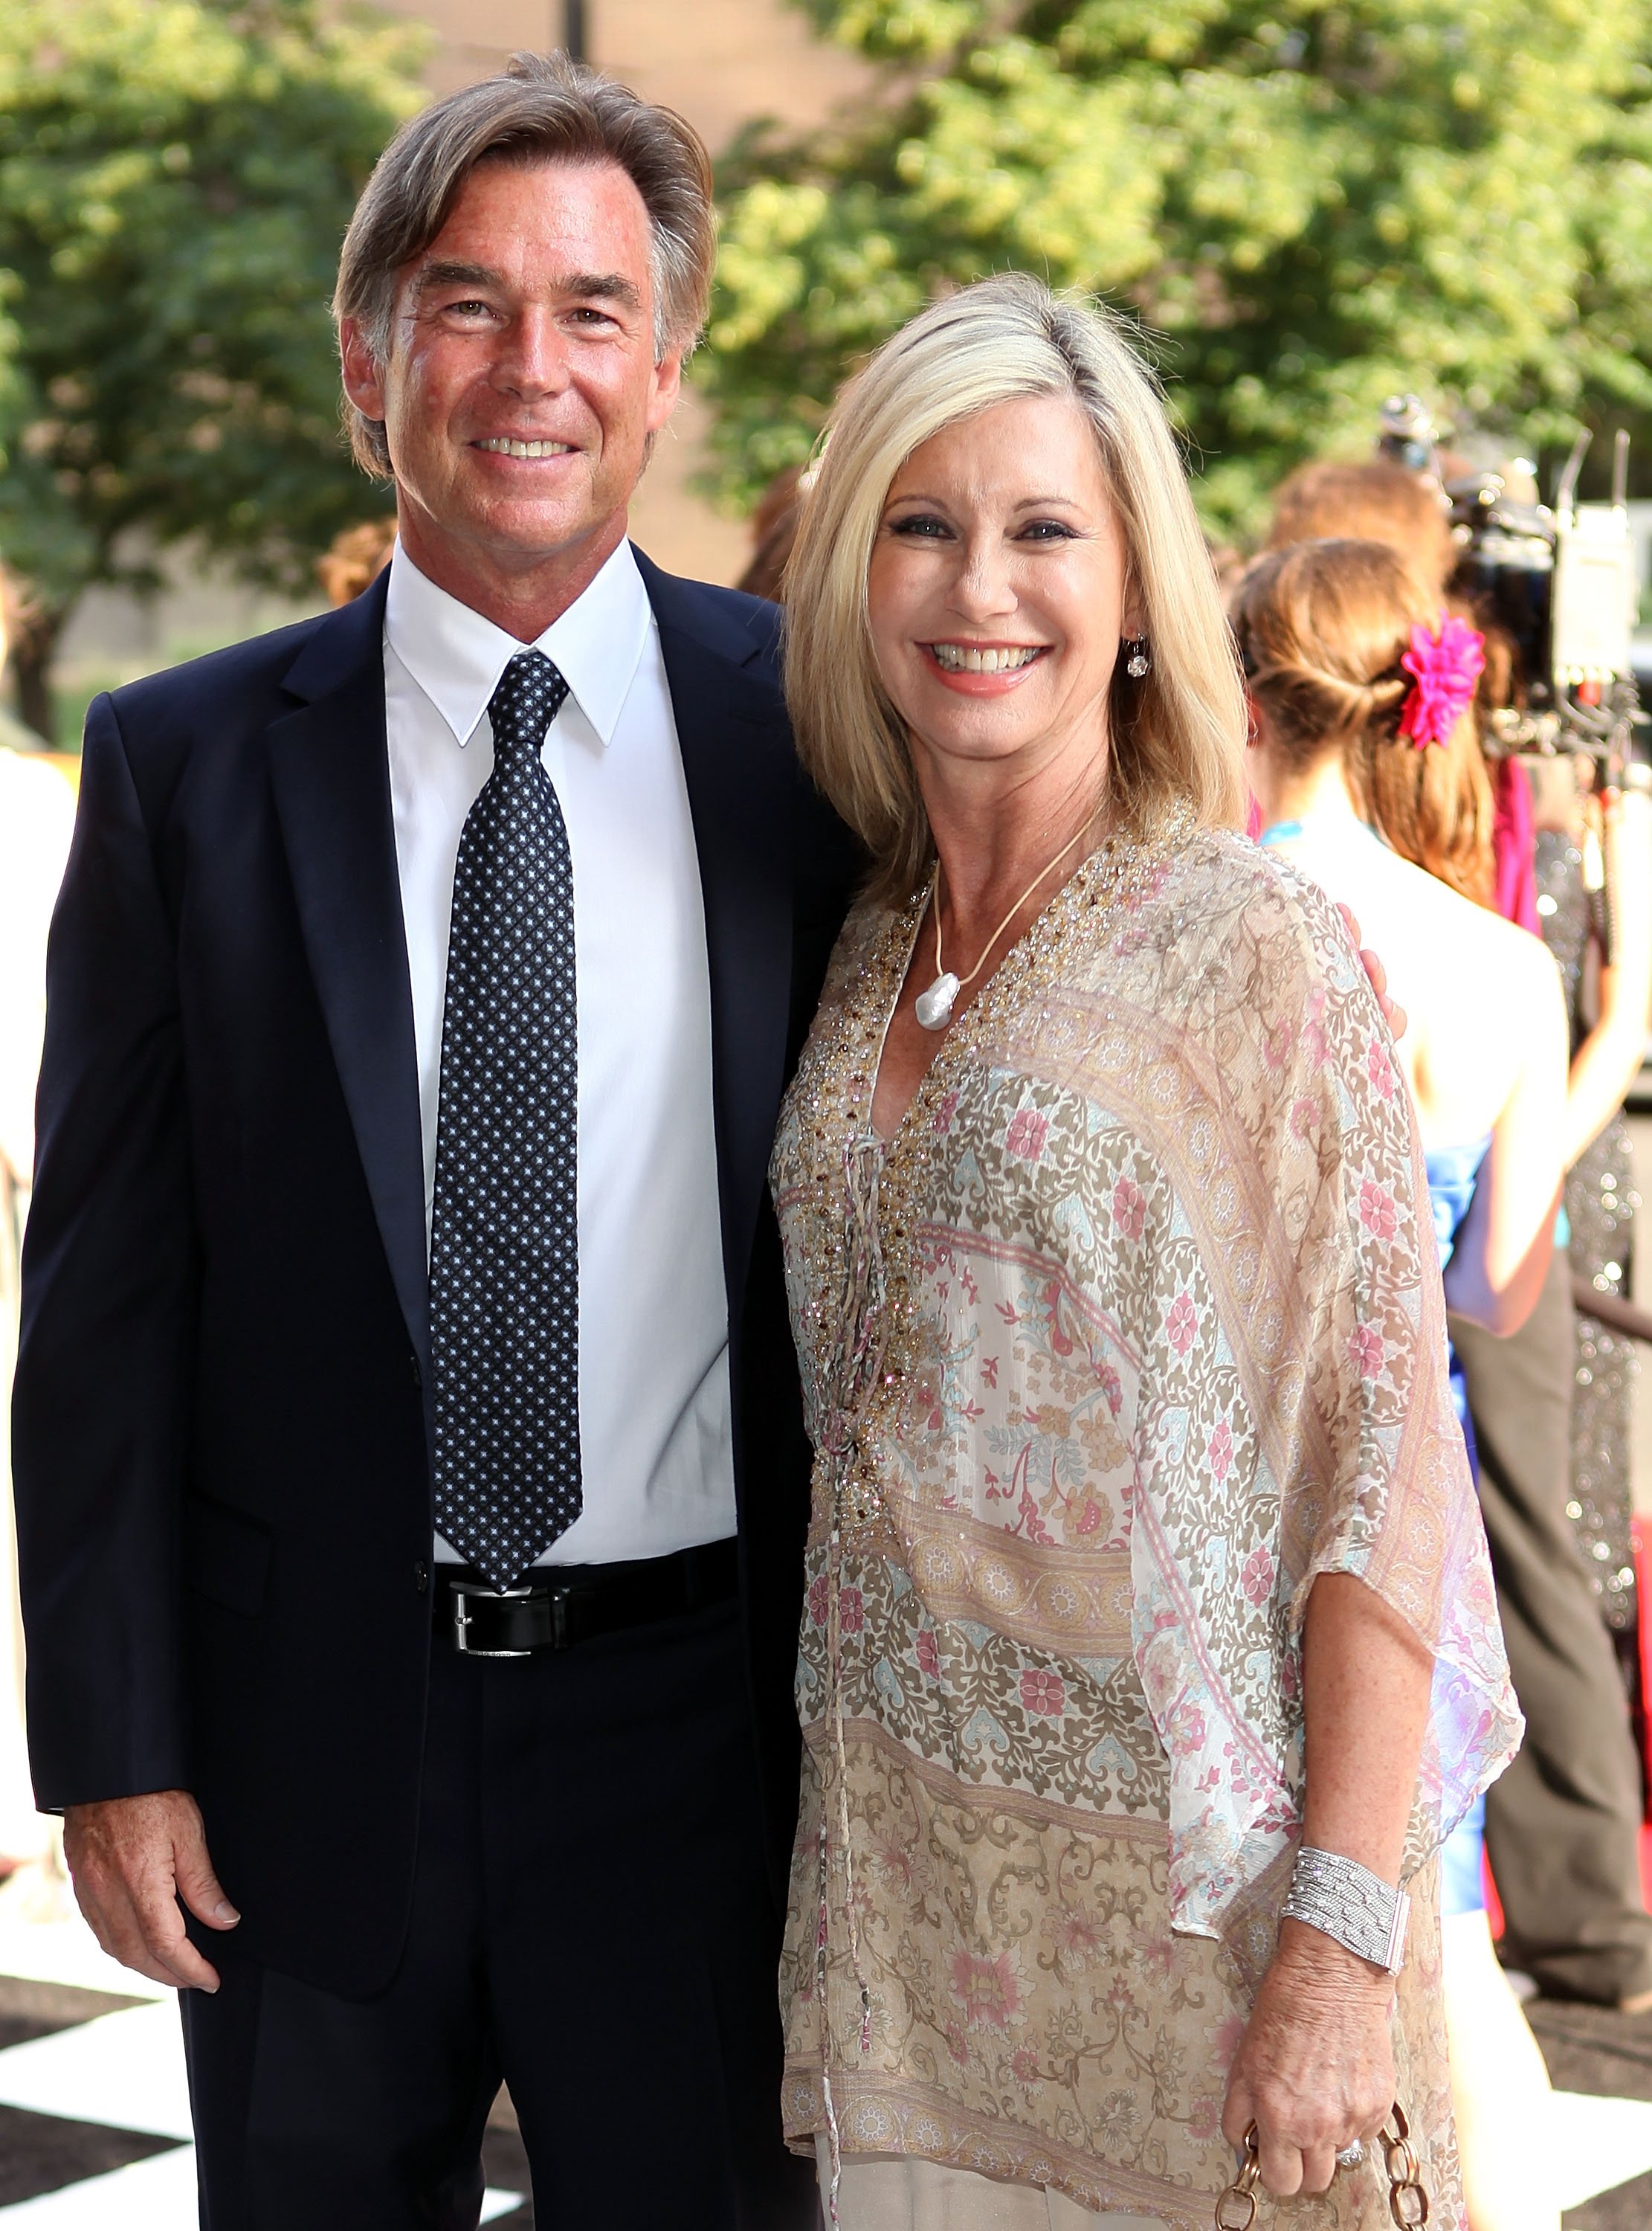 John Easterling and Olivia Newton-John attend 2012 Indy 500 Snakepit Ball at Indiana Roof Ballroom on May 26, 2012 in Indianapolis, Indiana. | Source: Getty Images 